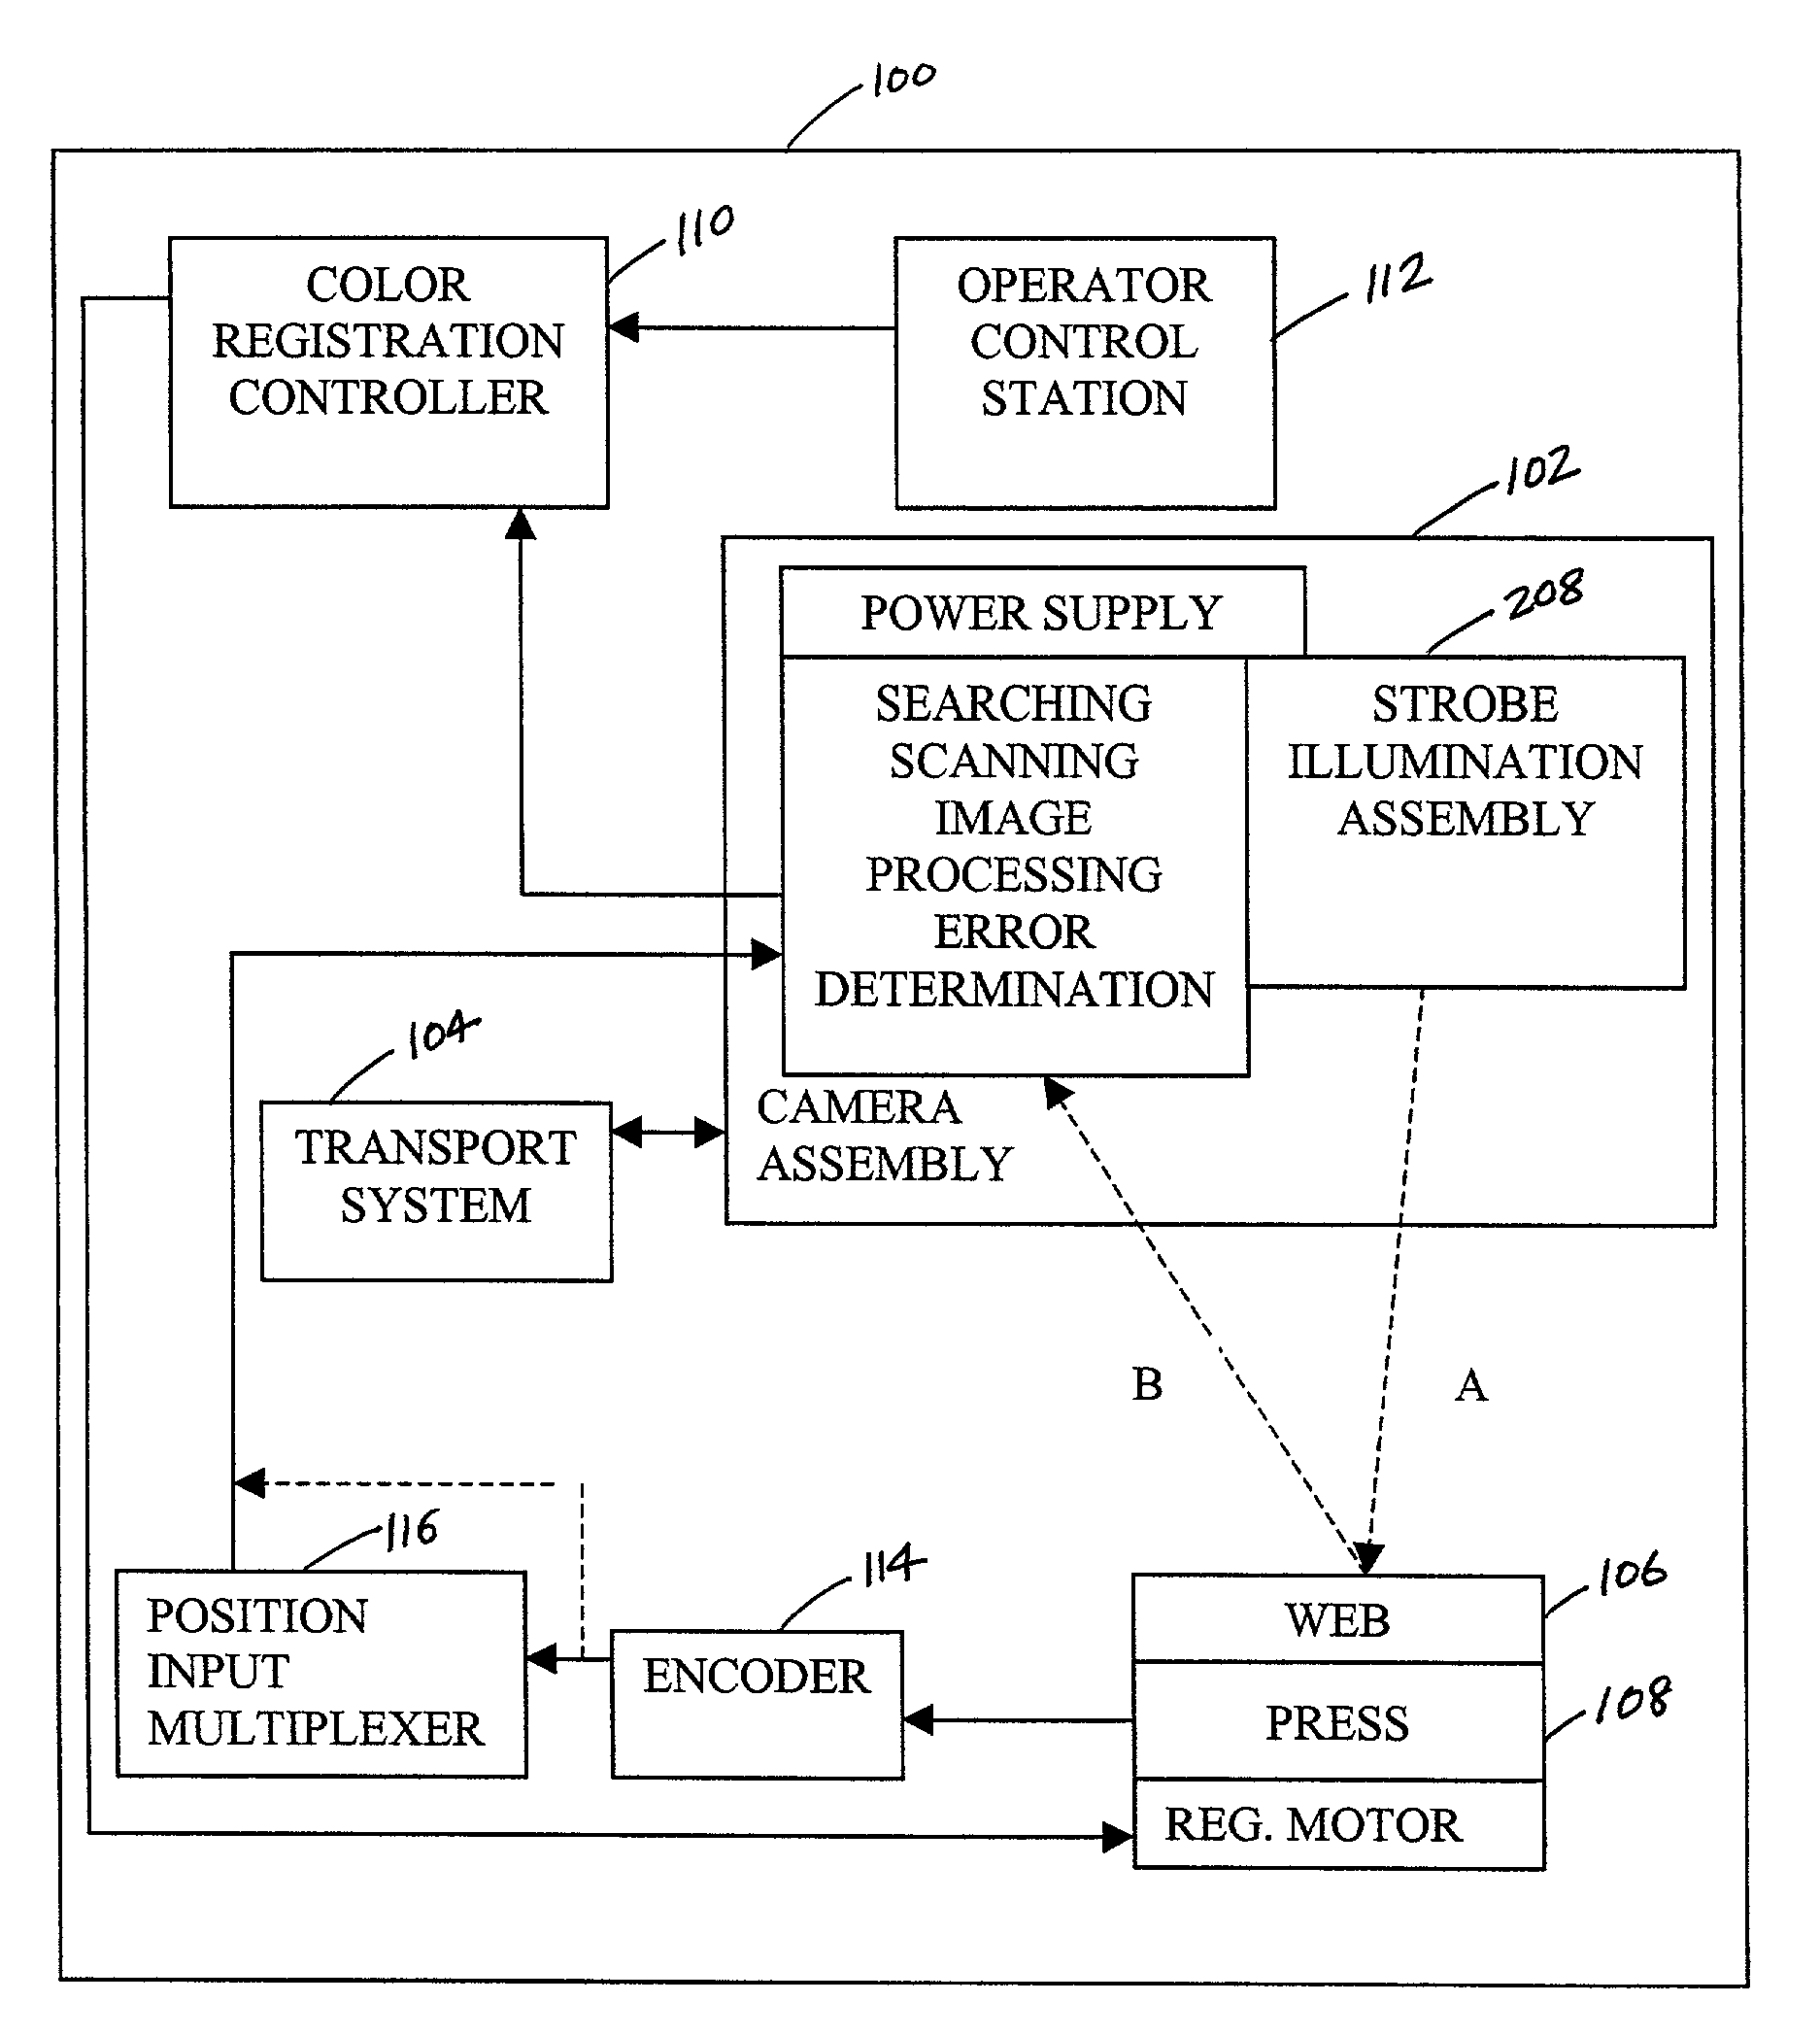 Color registration control system for a printing press